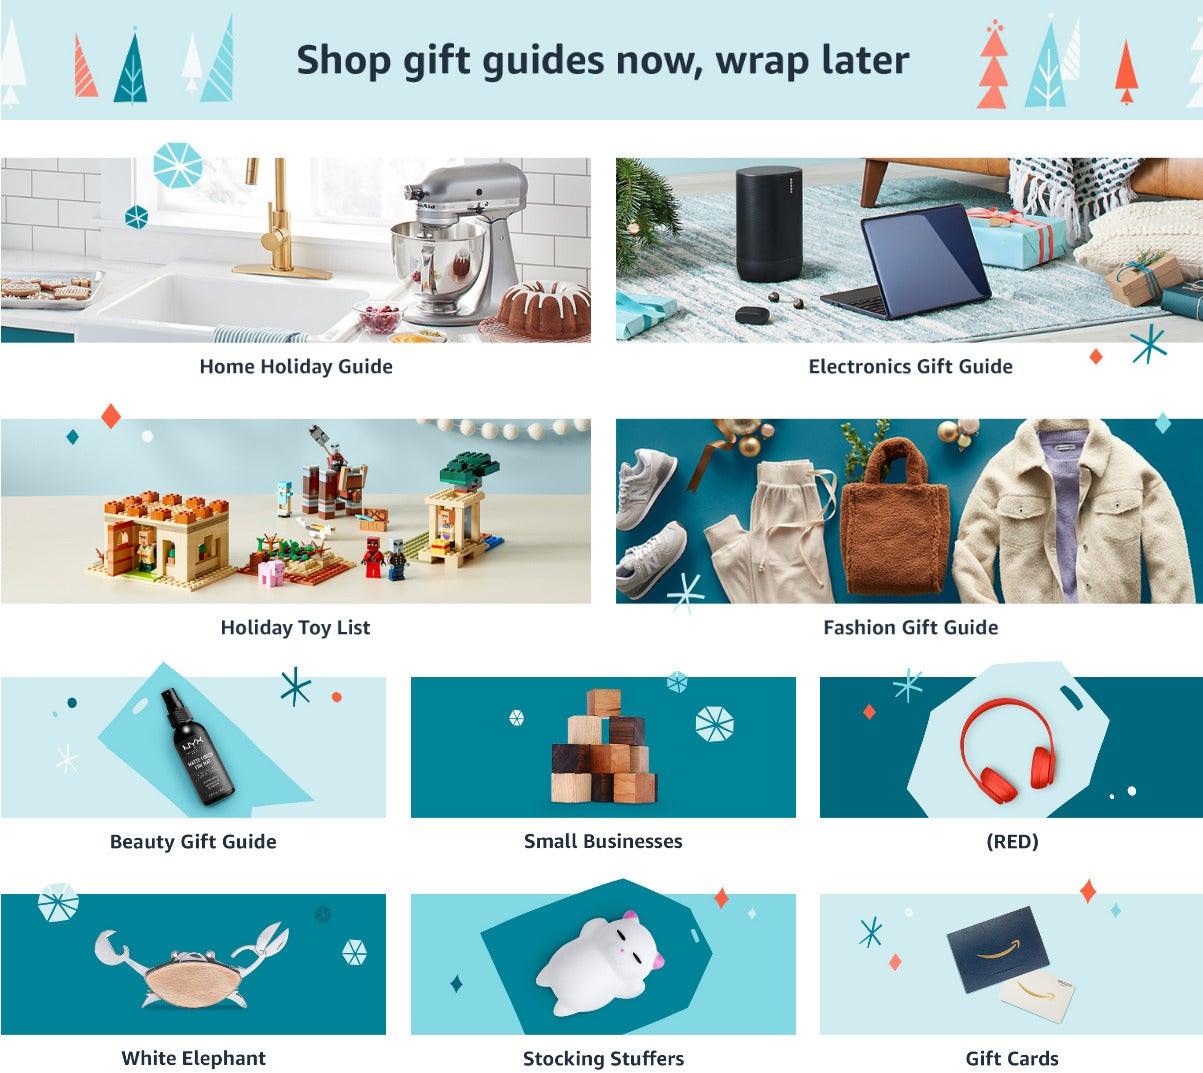 Shop Gifts for Everyone - The Amazon 2020 Holiday Guide Part 2 - 4aKid